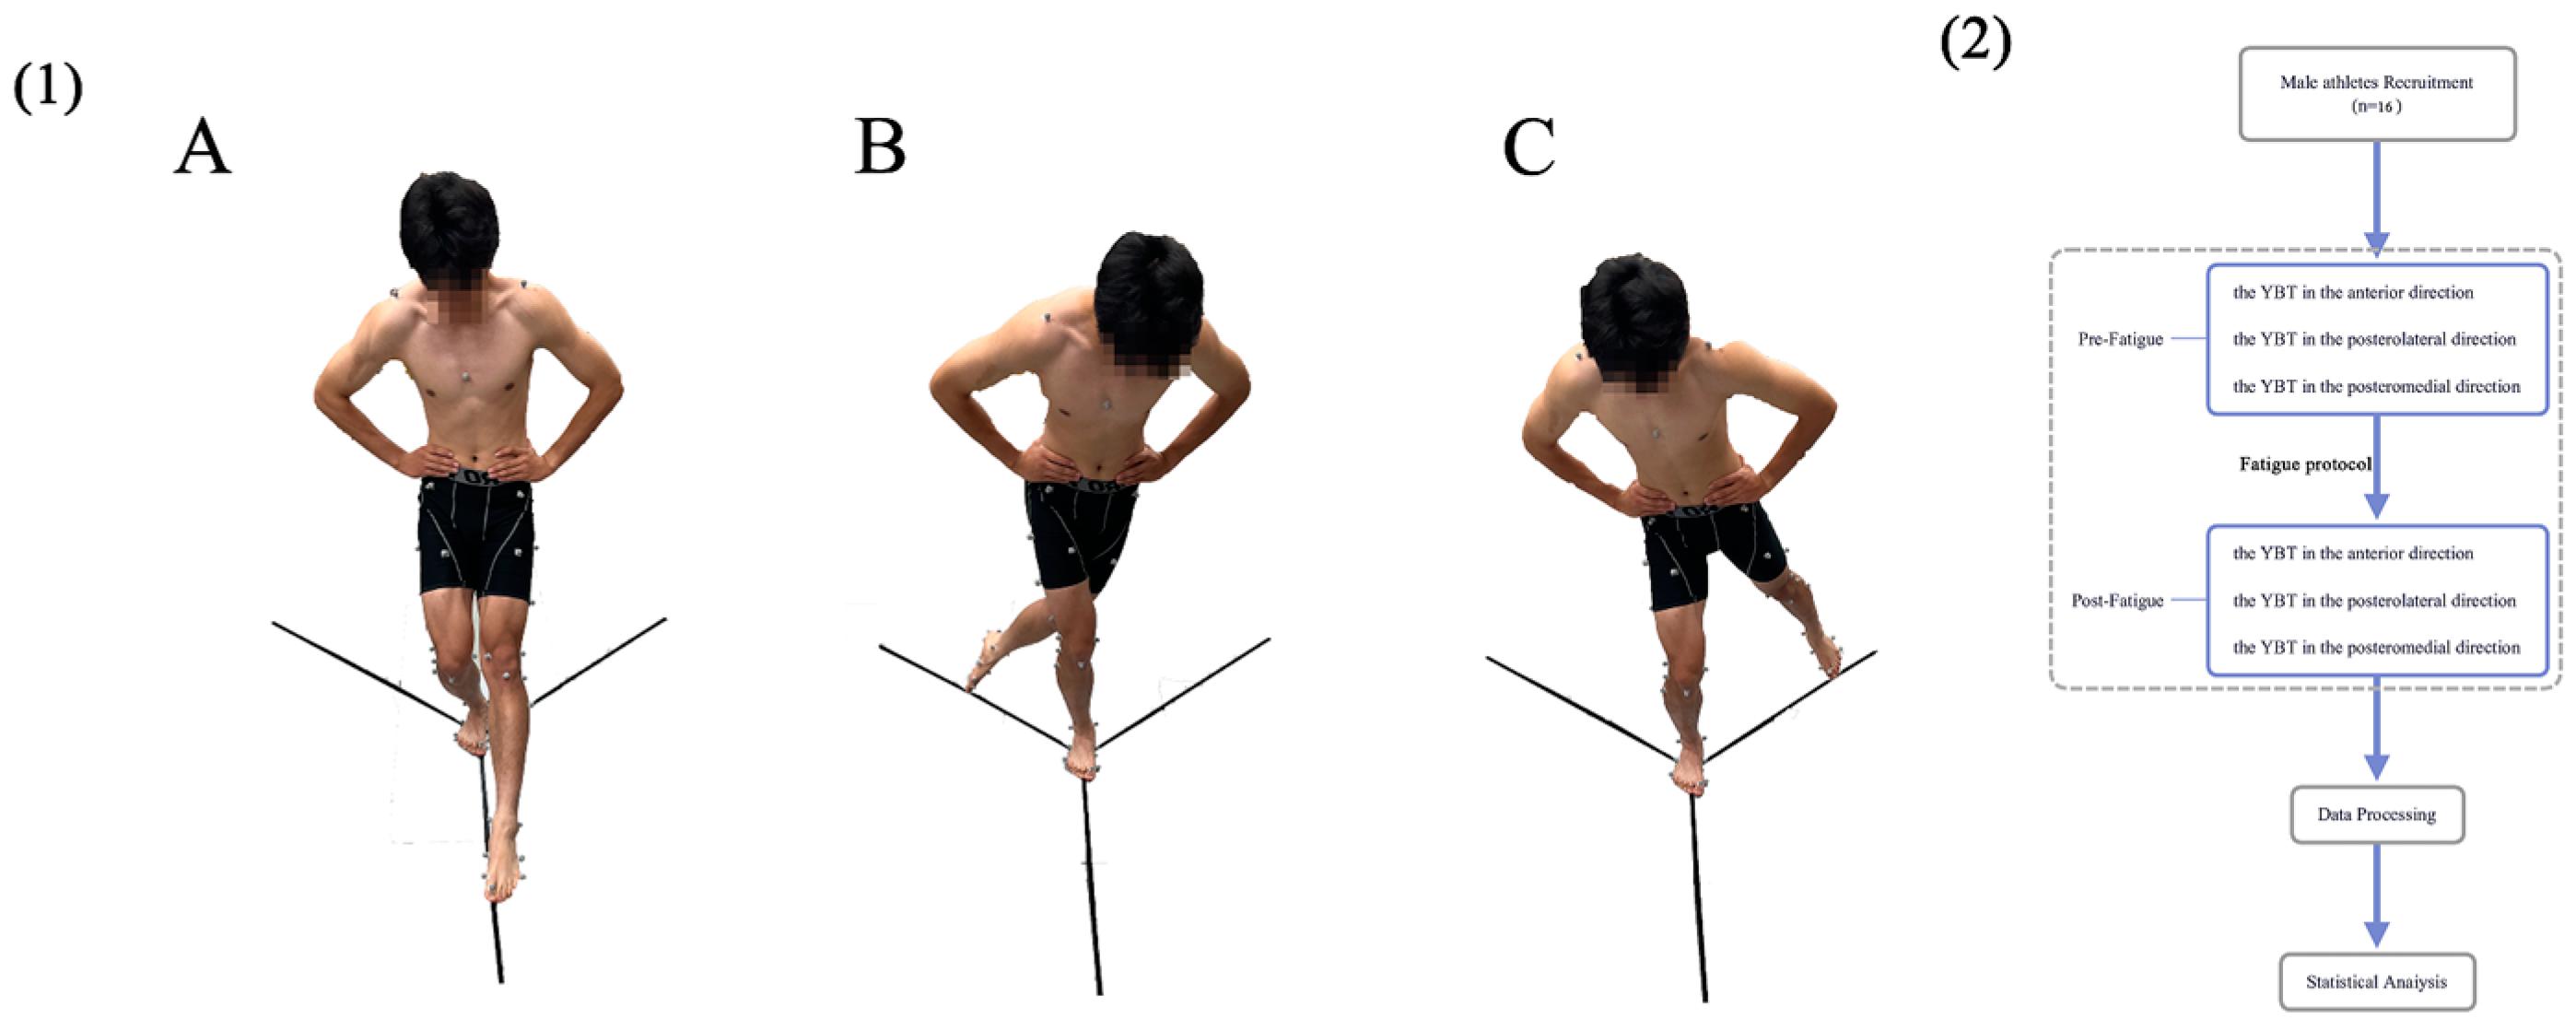 Healthcare Free Full-Text The Effects of Fatigue on the Lower Limb Biomechanics of Amateur Athletes during a Y-Balance Test image